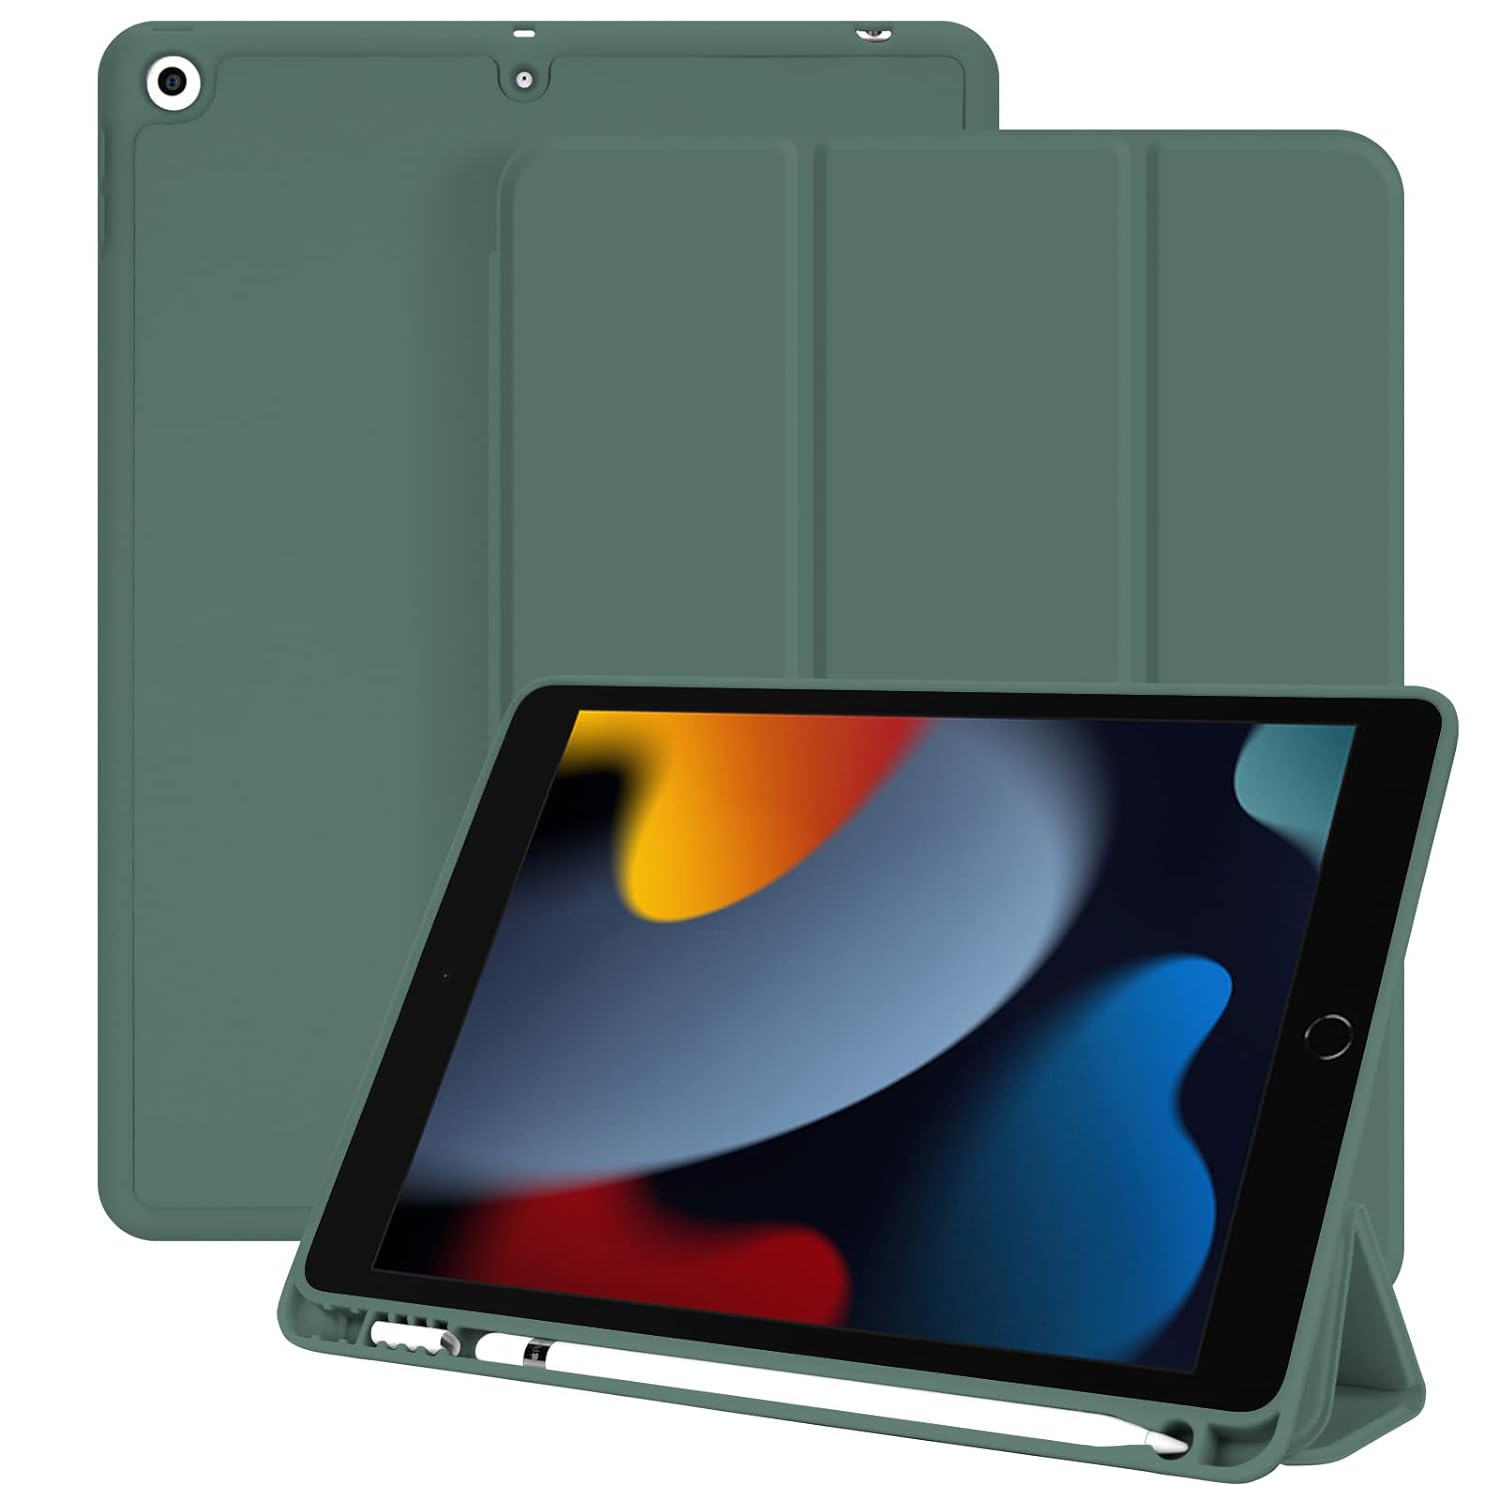 Dwopar iPad 10.2 Case, Protective Cover with Pencil Holder, Auto Sleep/Wake, Slim Soft TPU Back, Green